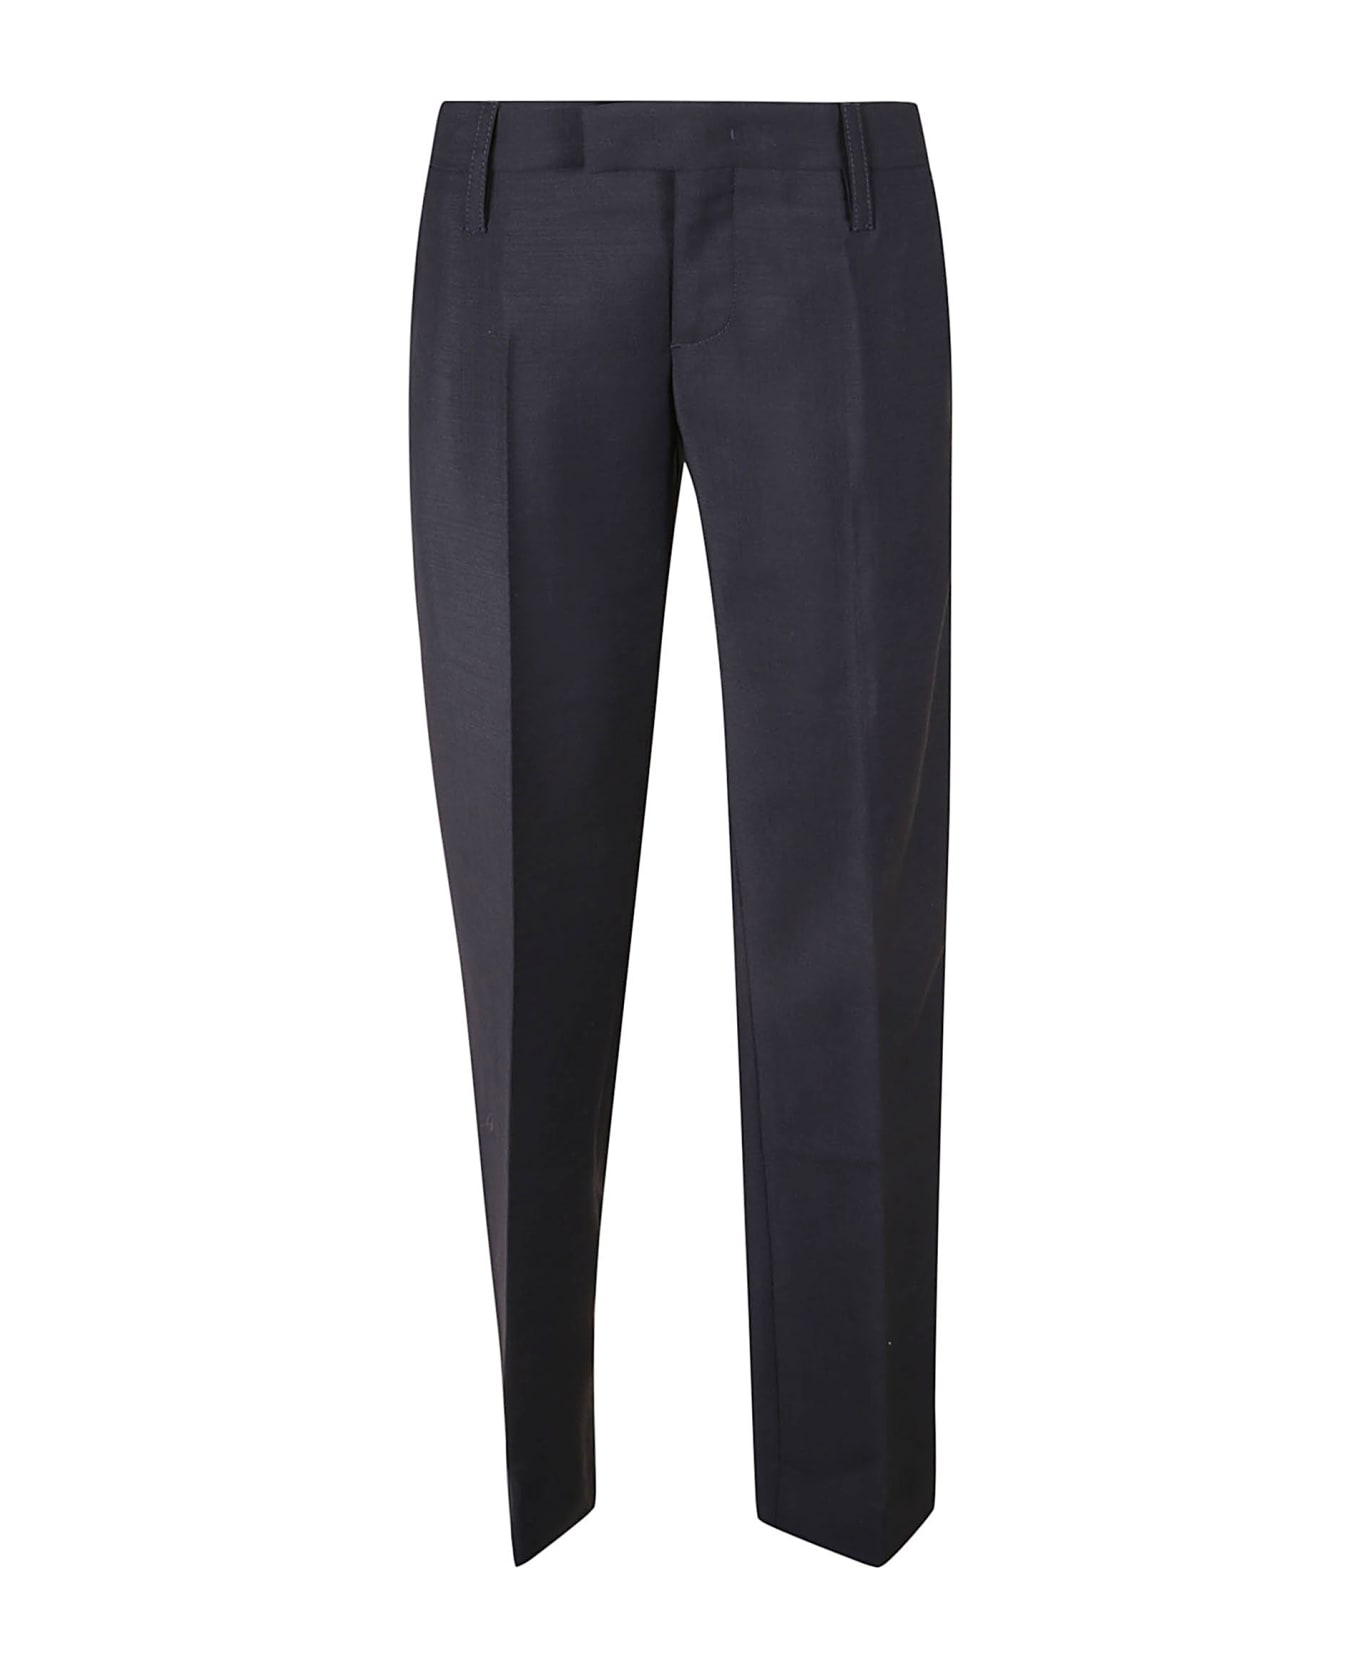 Miu Miu Fitted Classic Trousers - Navy ボトムス